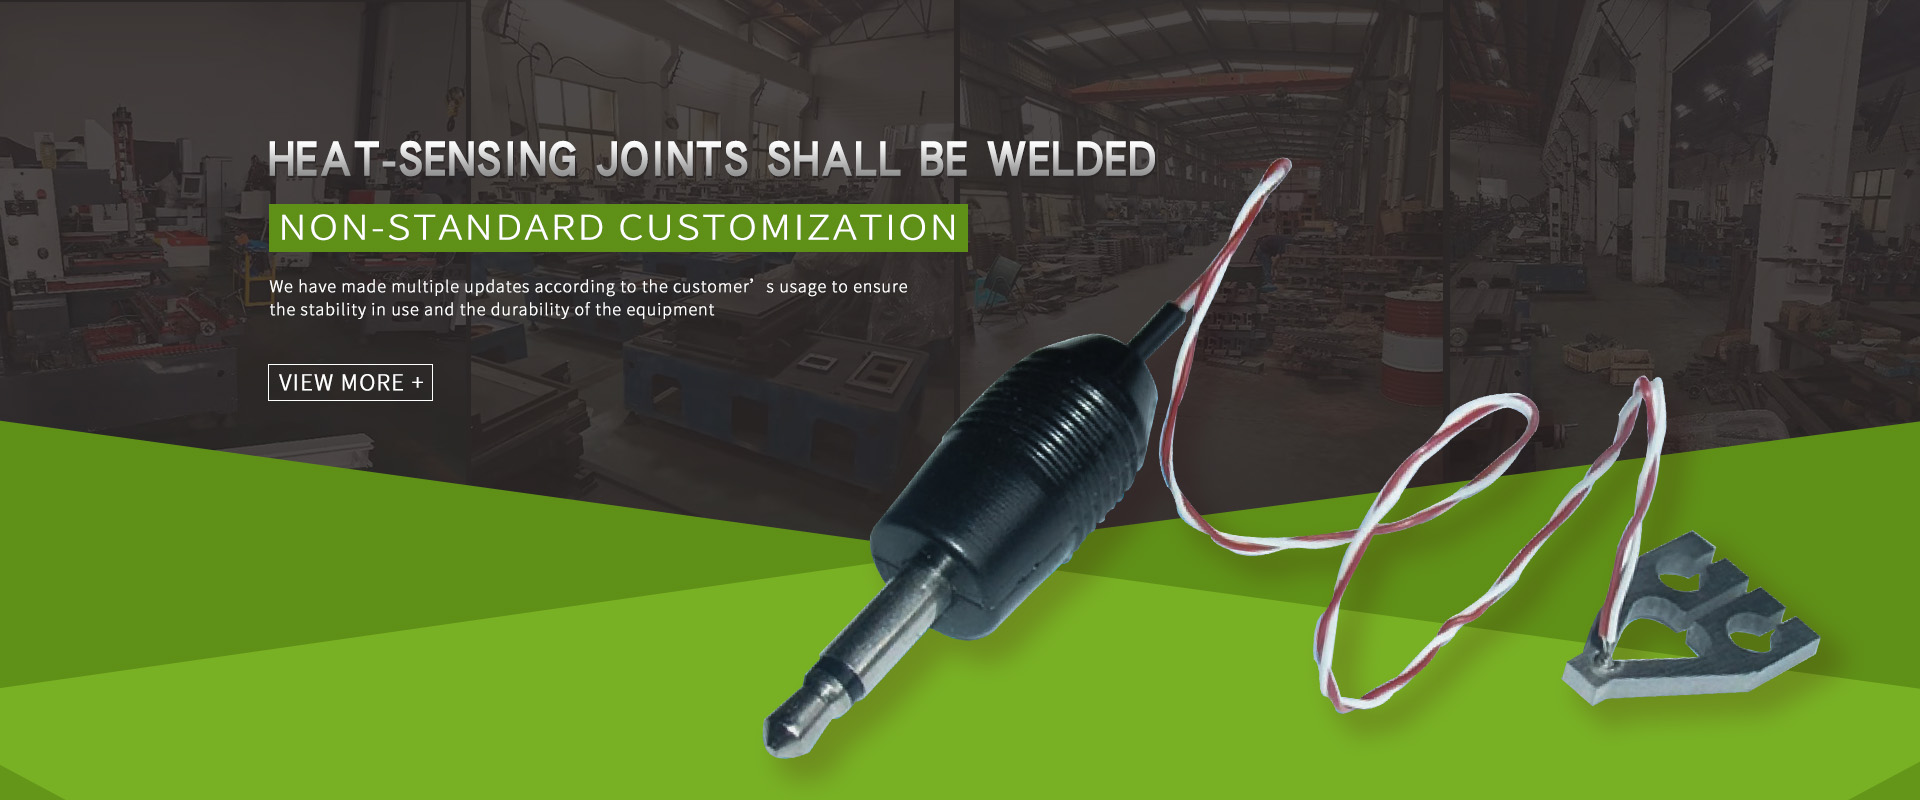 Heat-sensing joints shall be welded